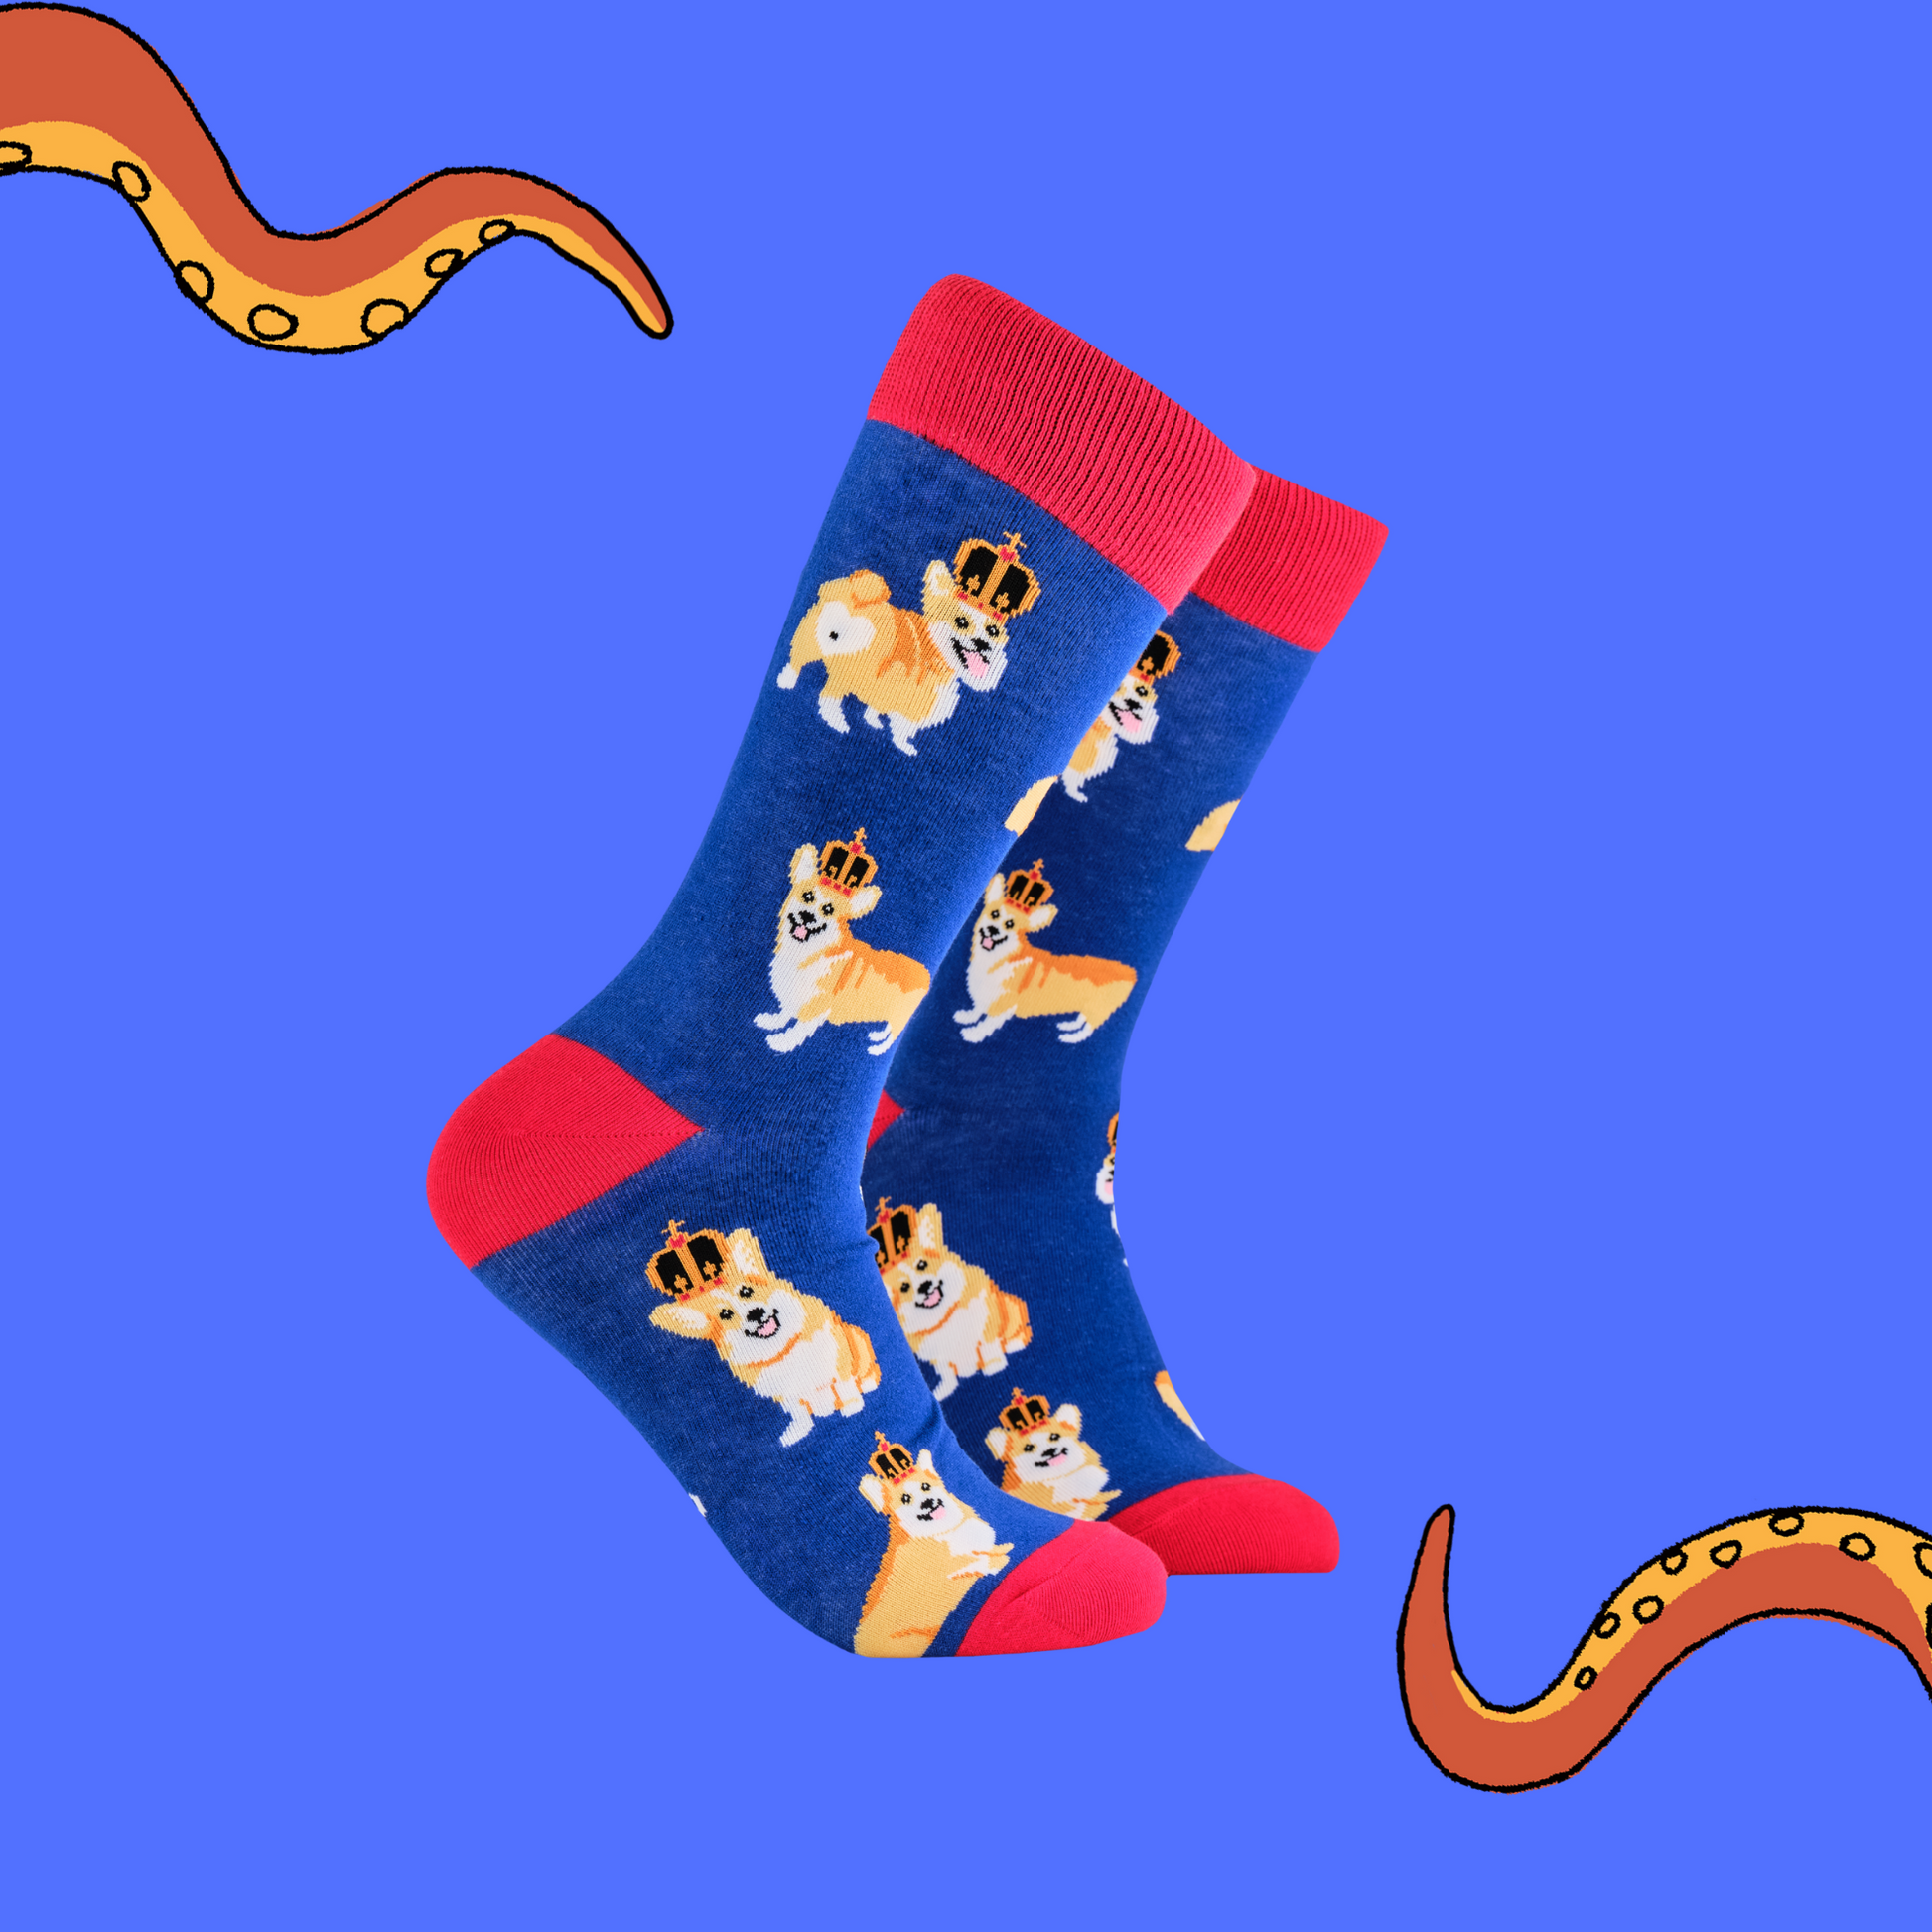 A pair of socks depicting corgis wearing crowns. Blue legs, red cuff, heel and toe.